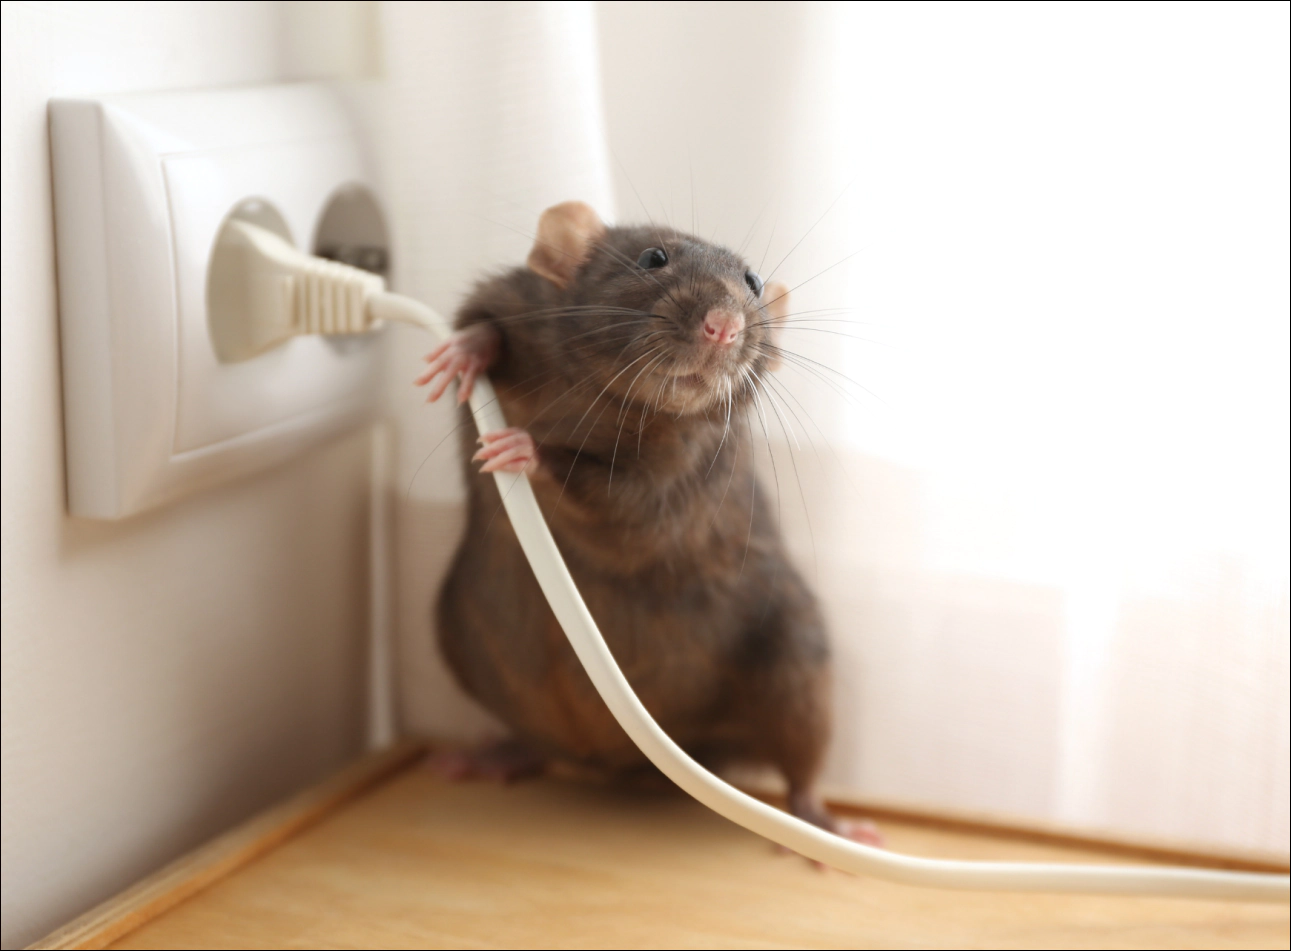 a rat holding an electrical cord